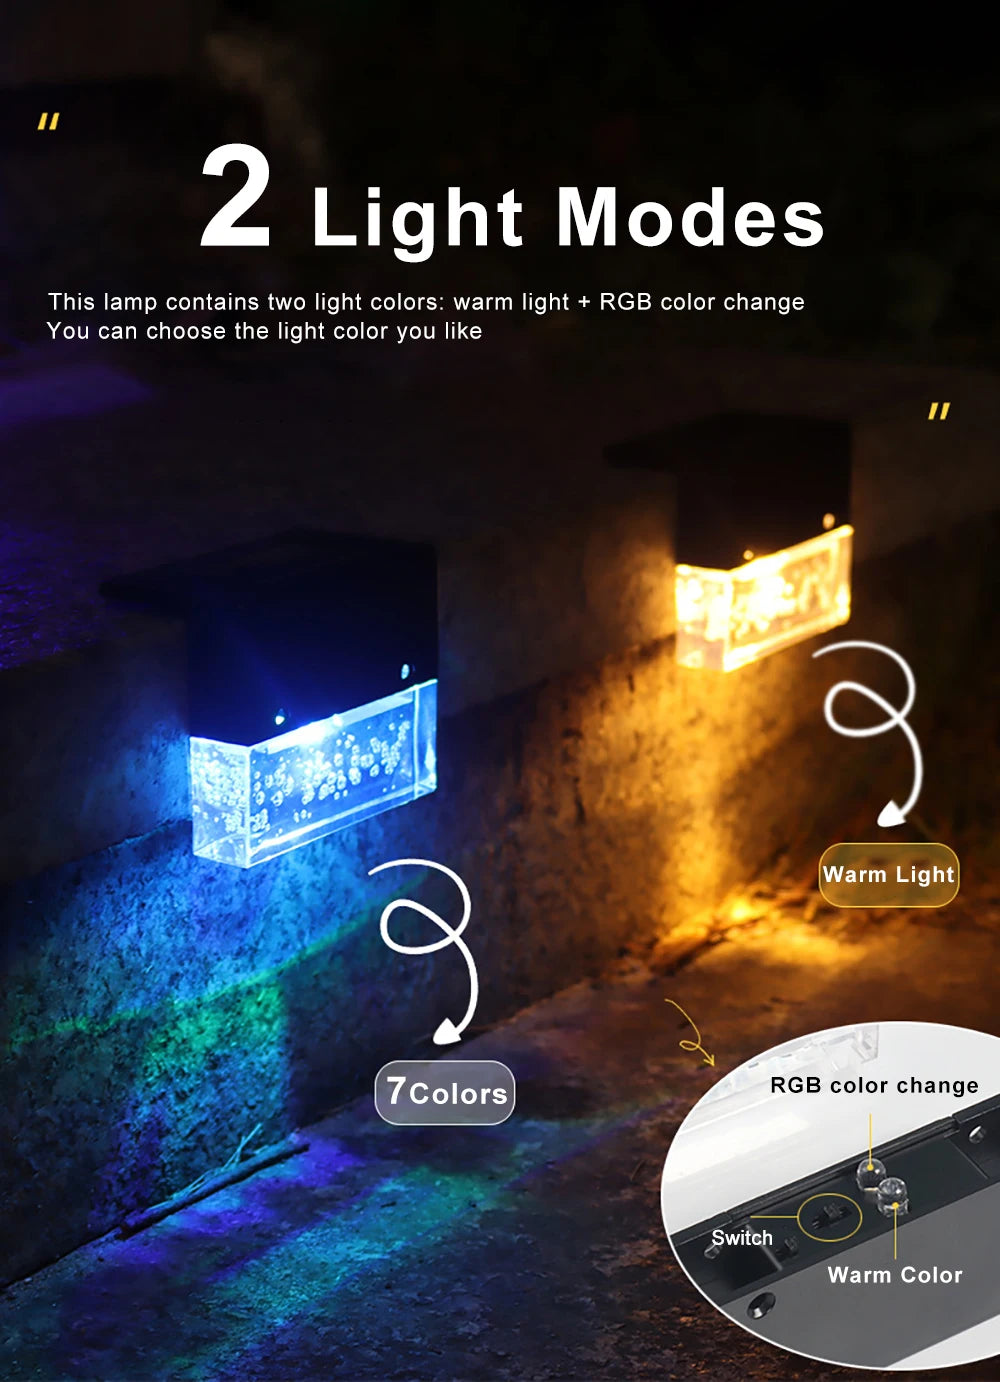 Solar LED Light, Two light modes: warm white and adjustable RGB colors with 10 color options.